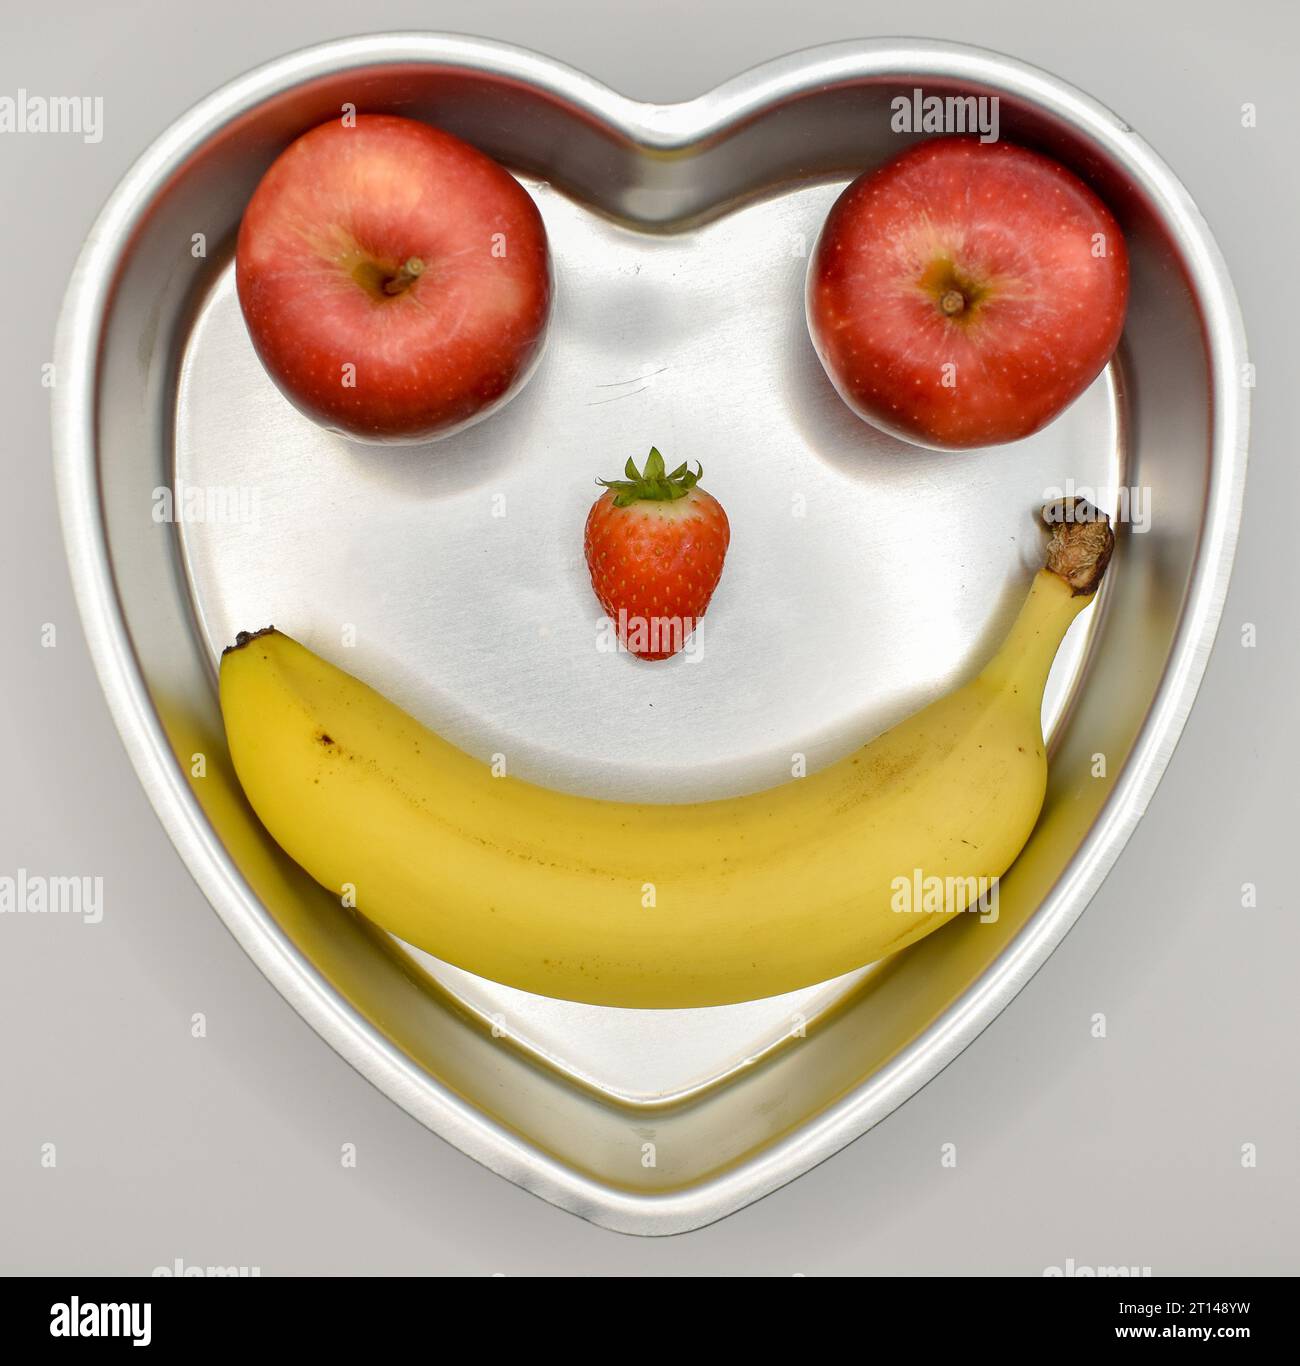 Eat healthy, a heart shaped tin with two apples, a strawberry and a banana arranged to make a smiling face. Stock Photo